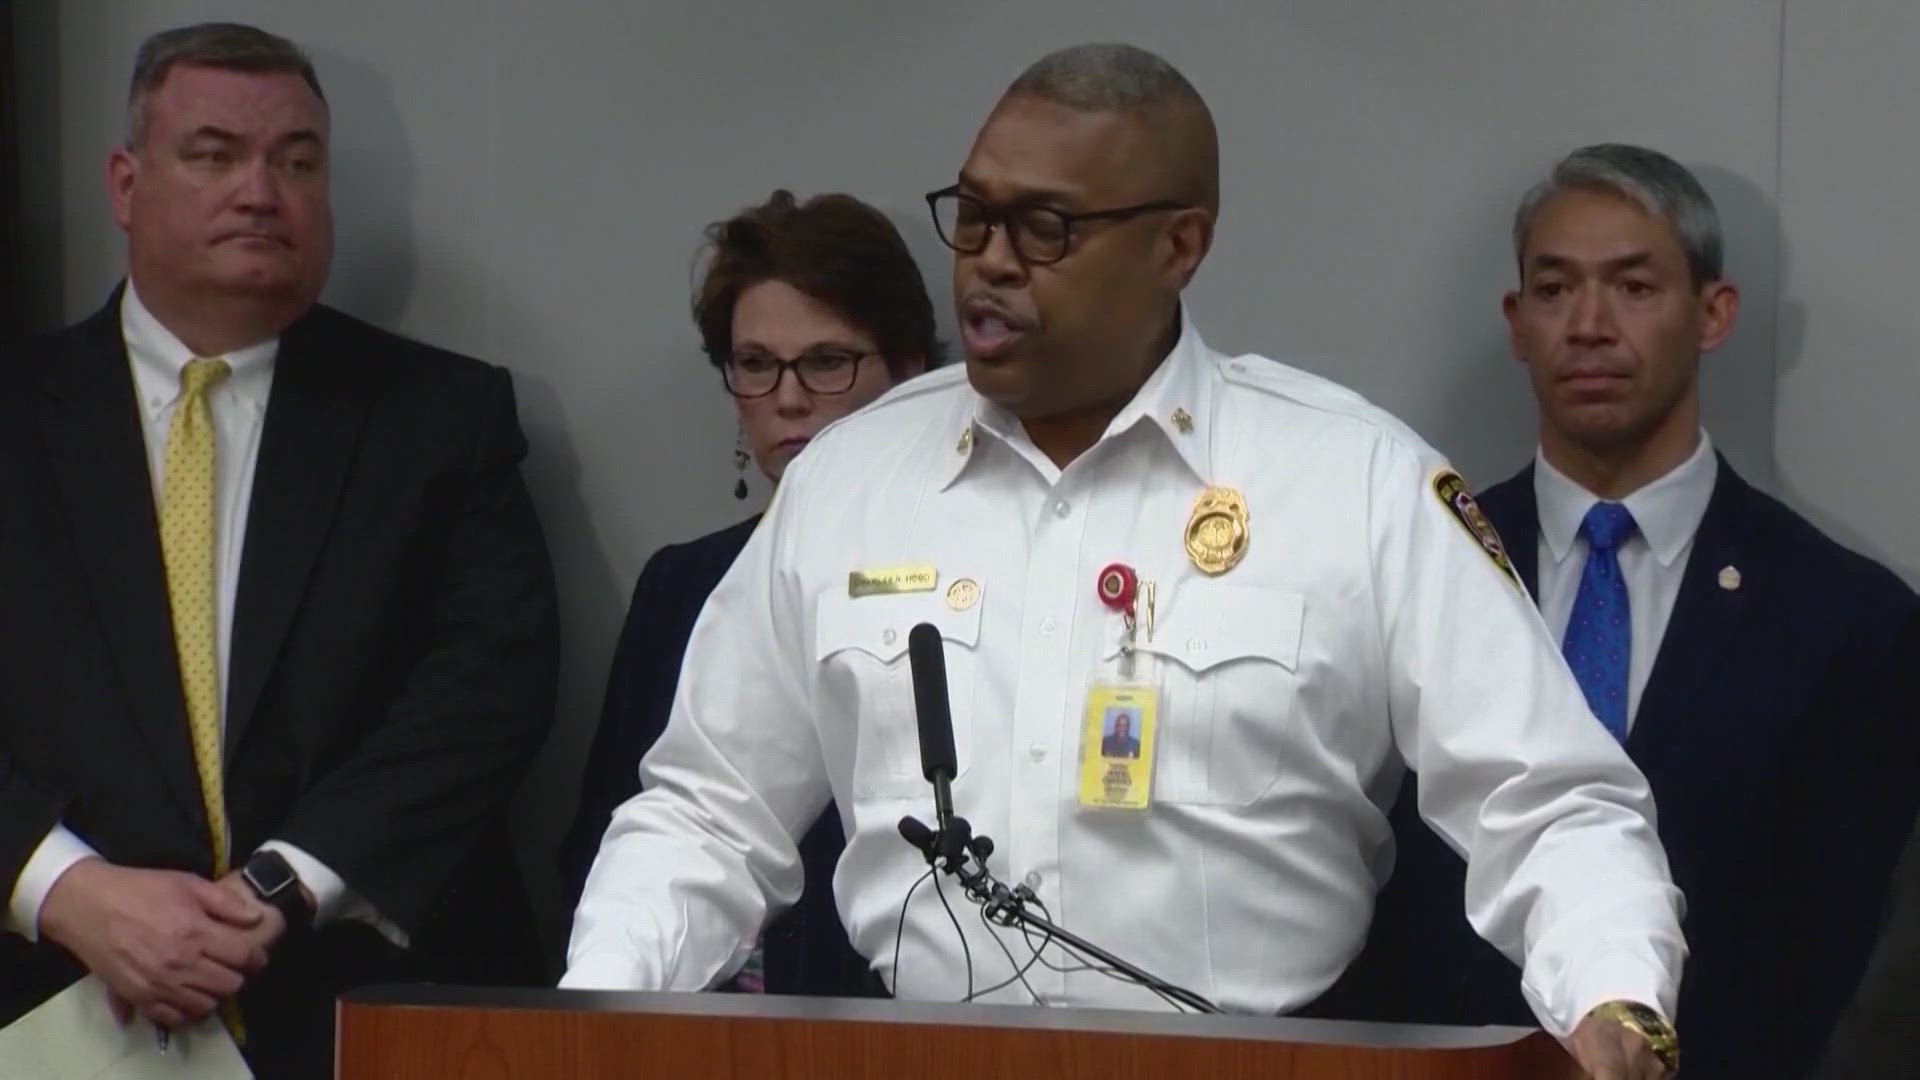 Joe Jones claimed many firefighters felt the decision made by the city regarding Charles Hood was past due.